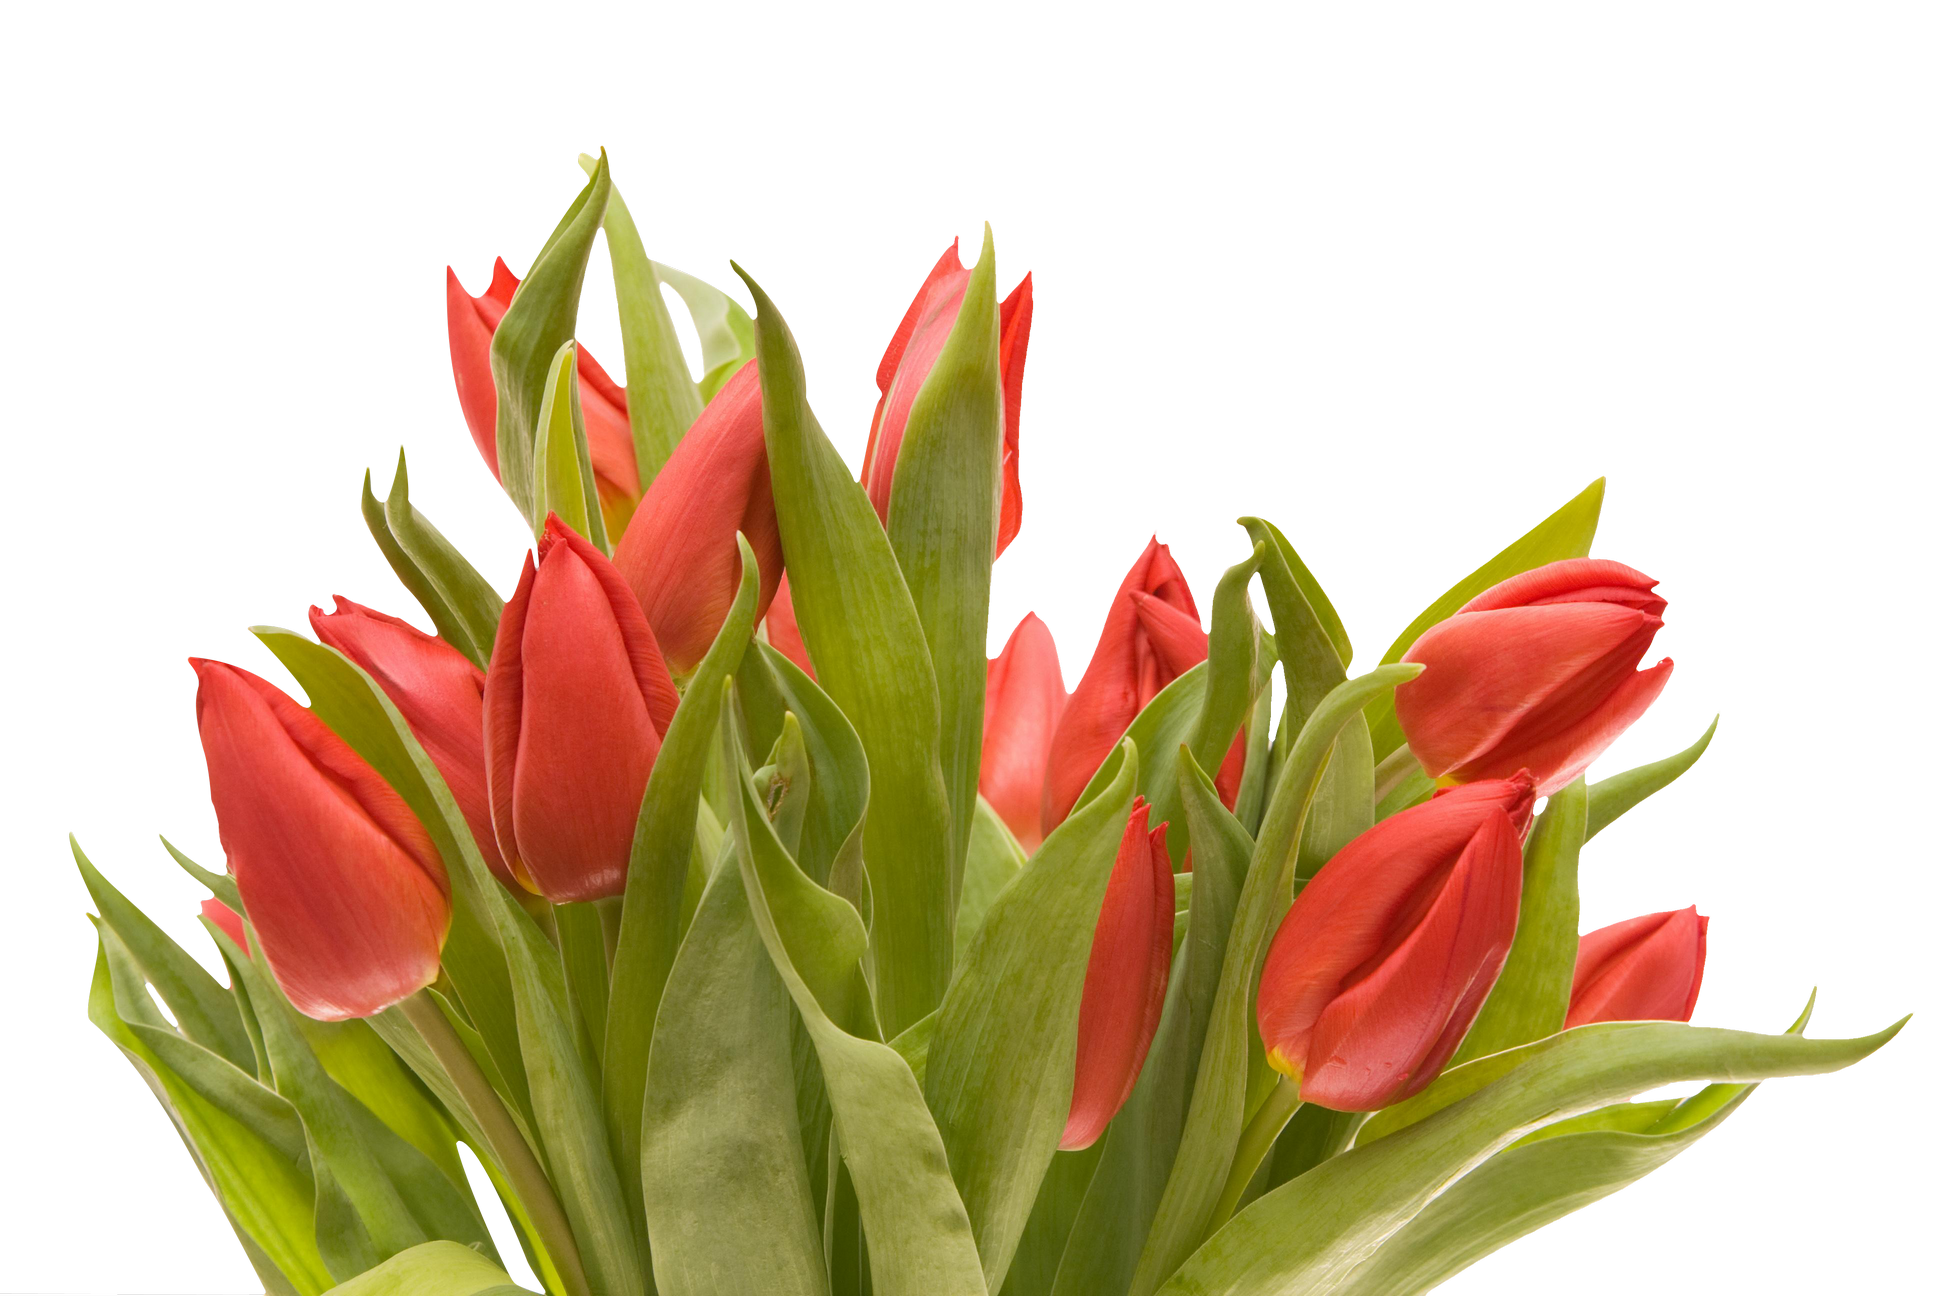 Bouquet Of Flowers PNG Image